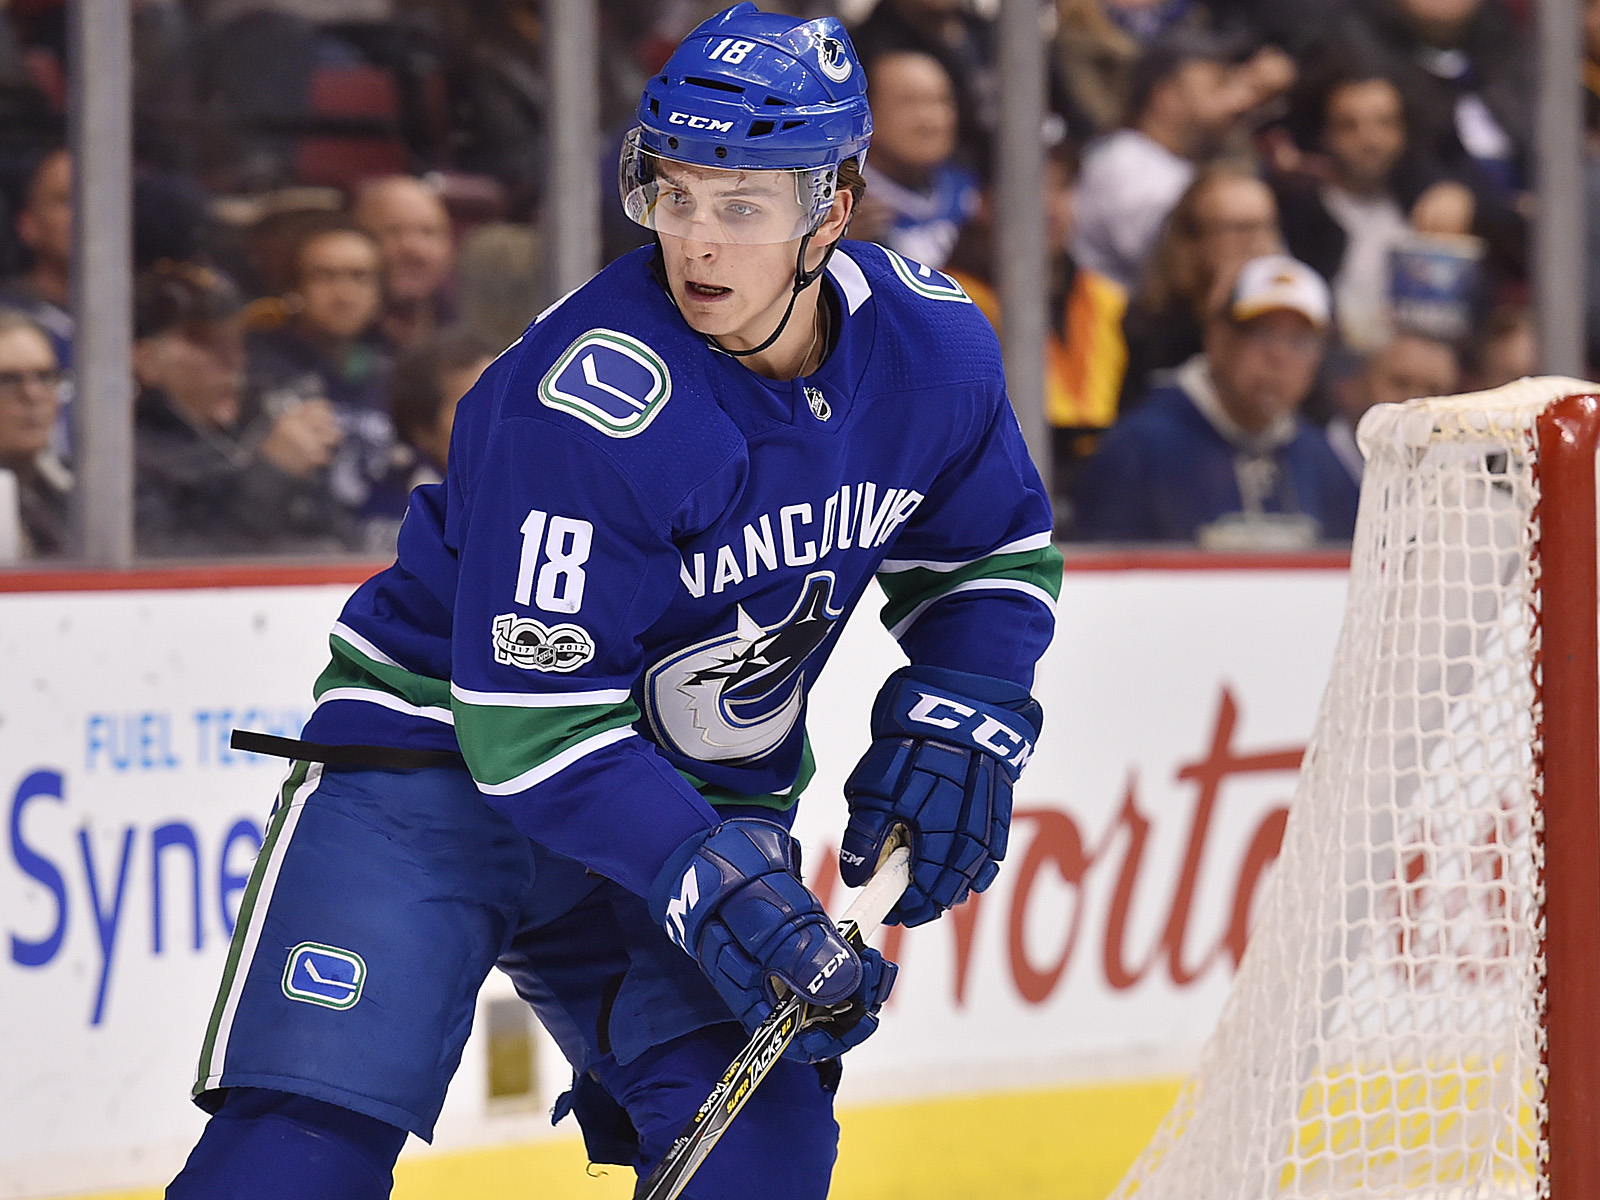 Speed Skate: The story behind the Vancouver Canucks' 'flying skate